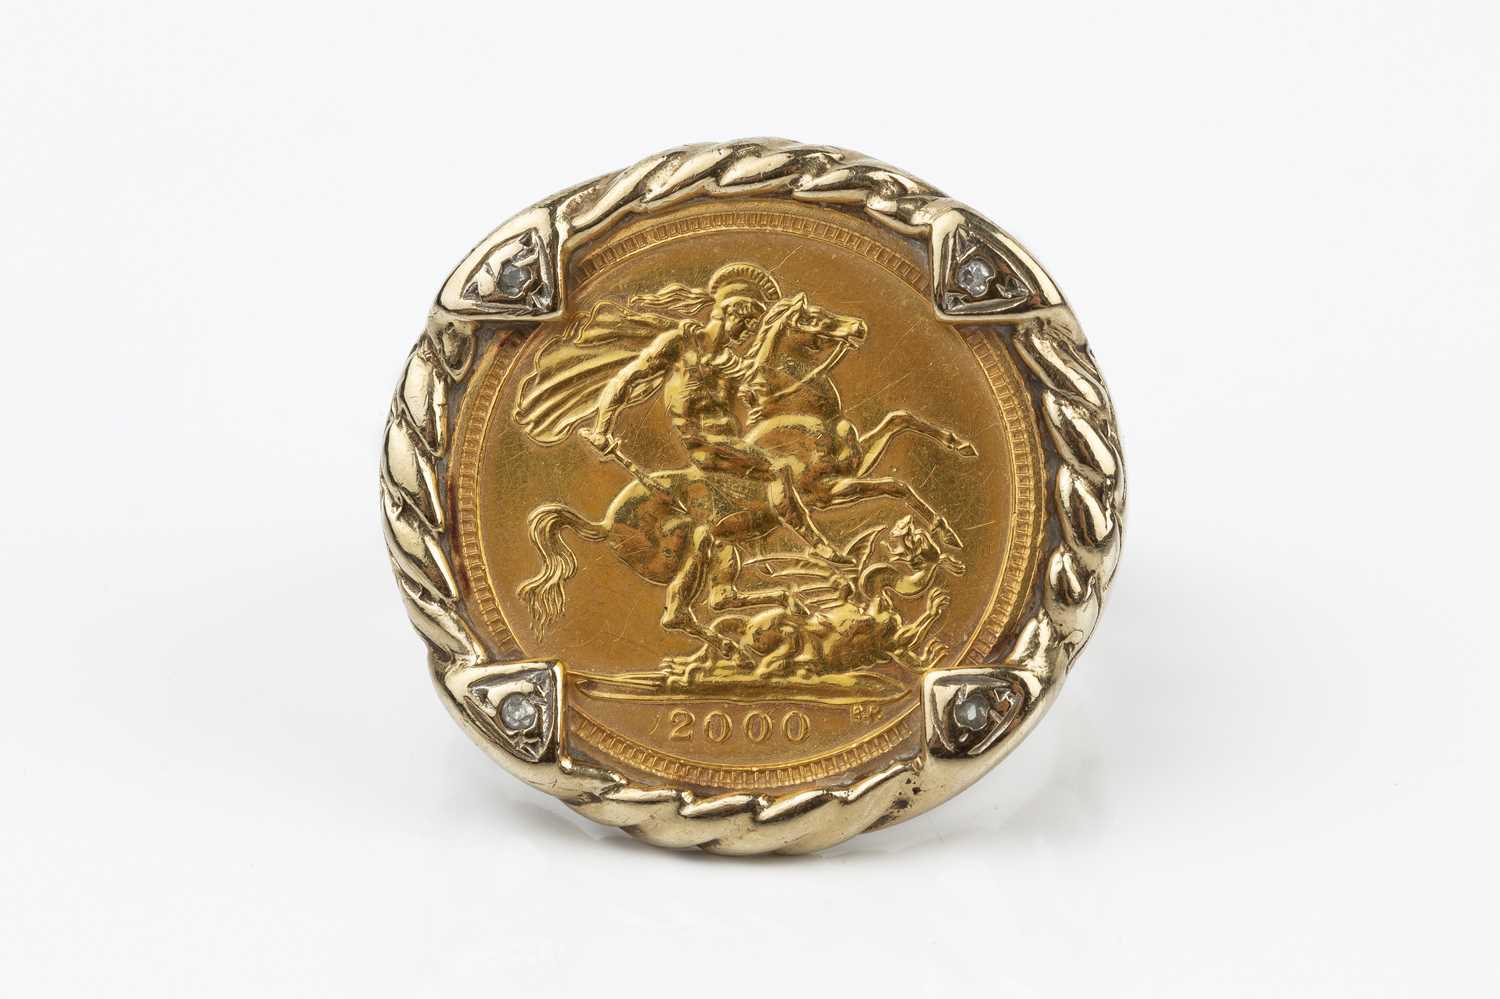 SOLD 9ct Yellow Gold Ring with 1912 Half Sovereign Coin